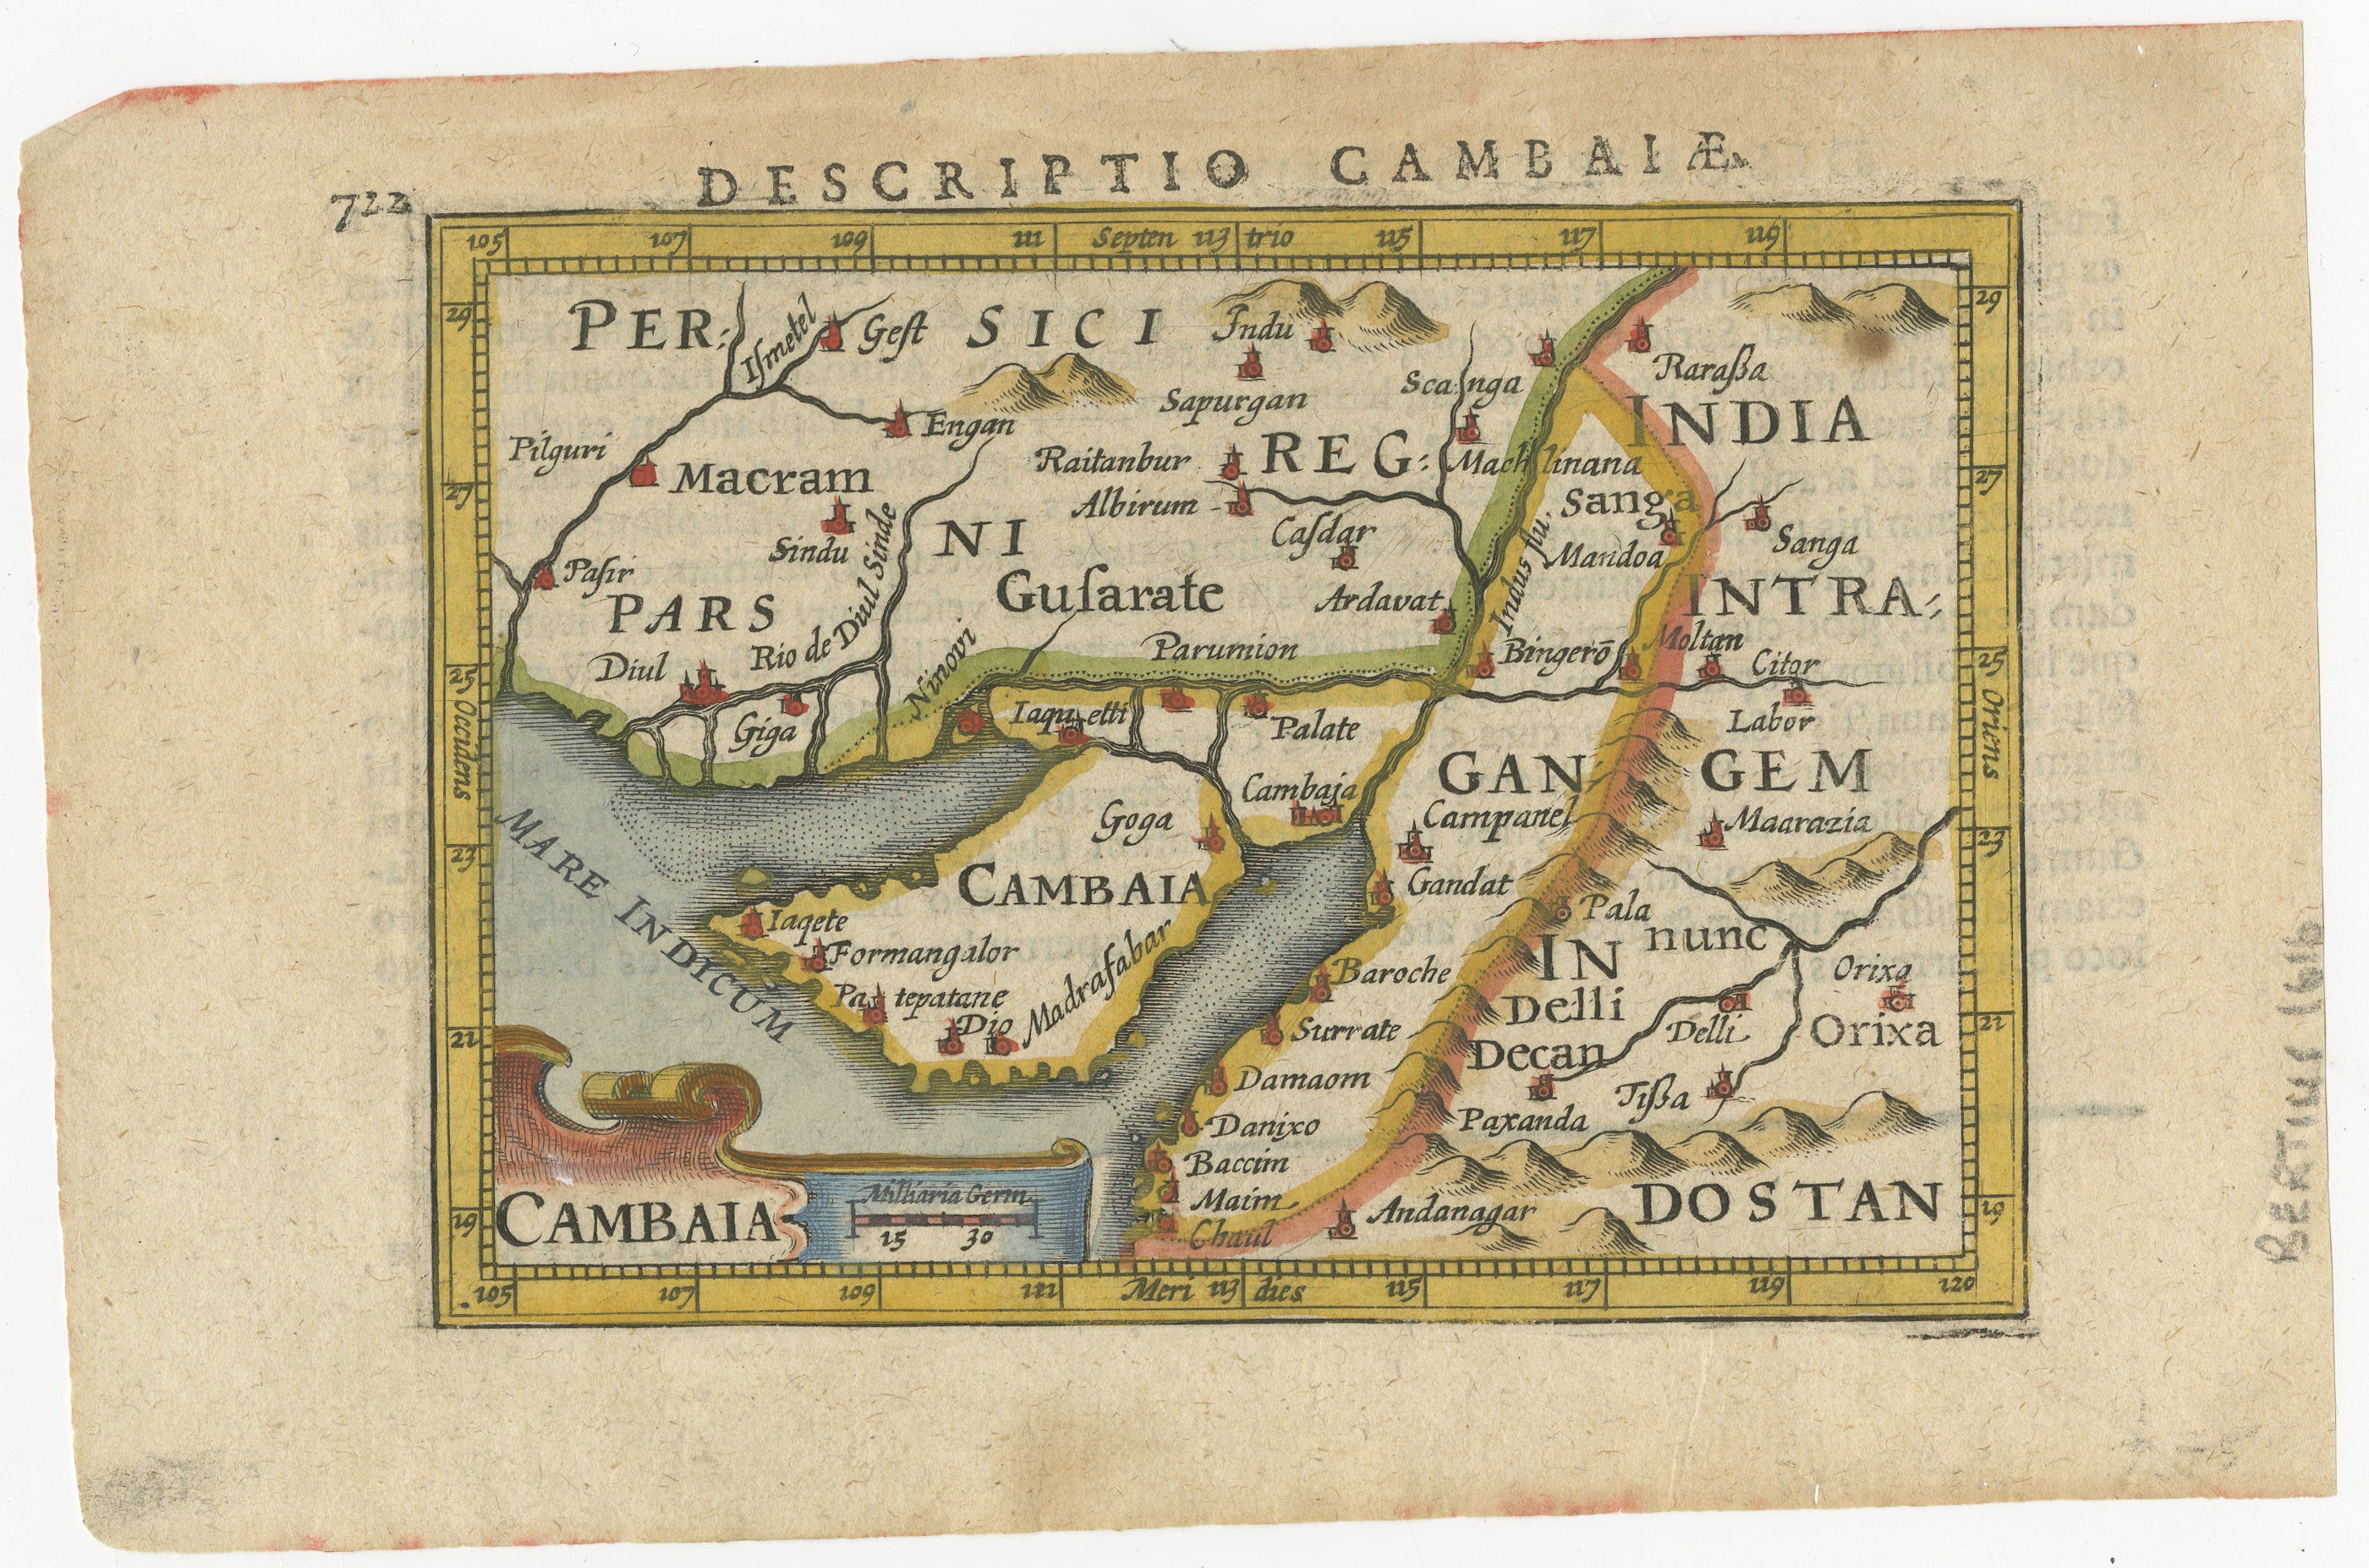 Old 17th century miniature antique map of 'Cambaia' , from the 1616 edition of Jadocus Hondius Atlas by Petrus Bertius.

Original copperplate engraving with hand coloring.

Cartographer: Petrus Bertius
Bertius was also connected by marriage to